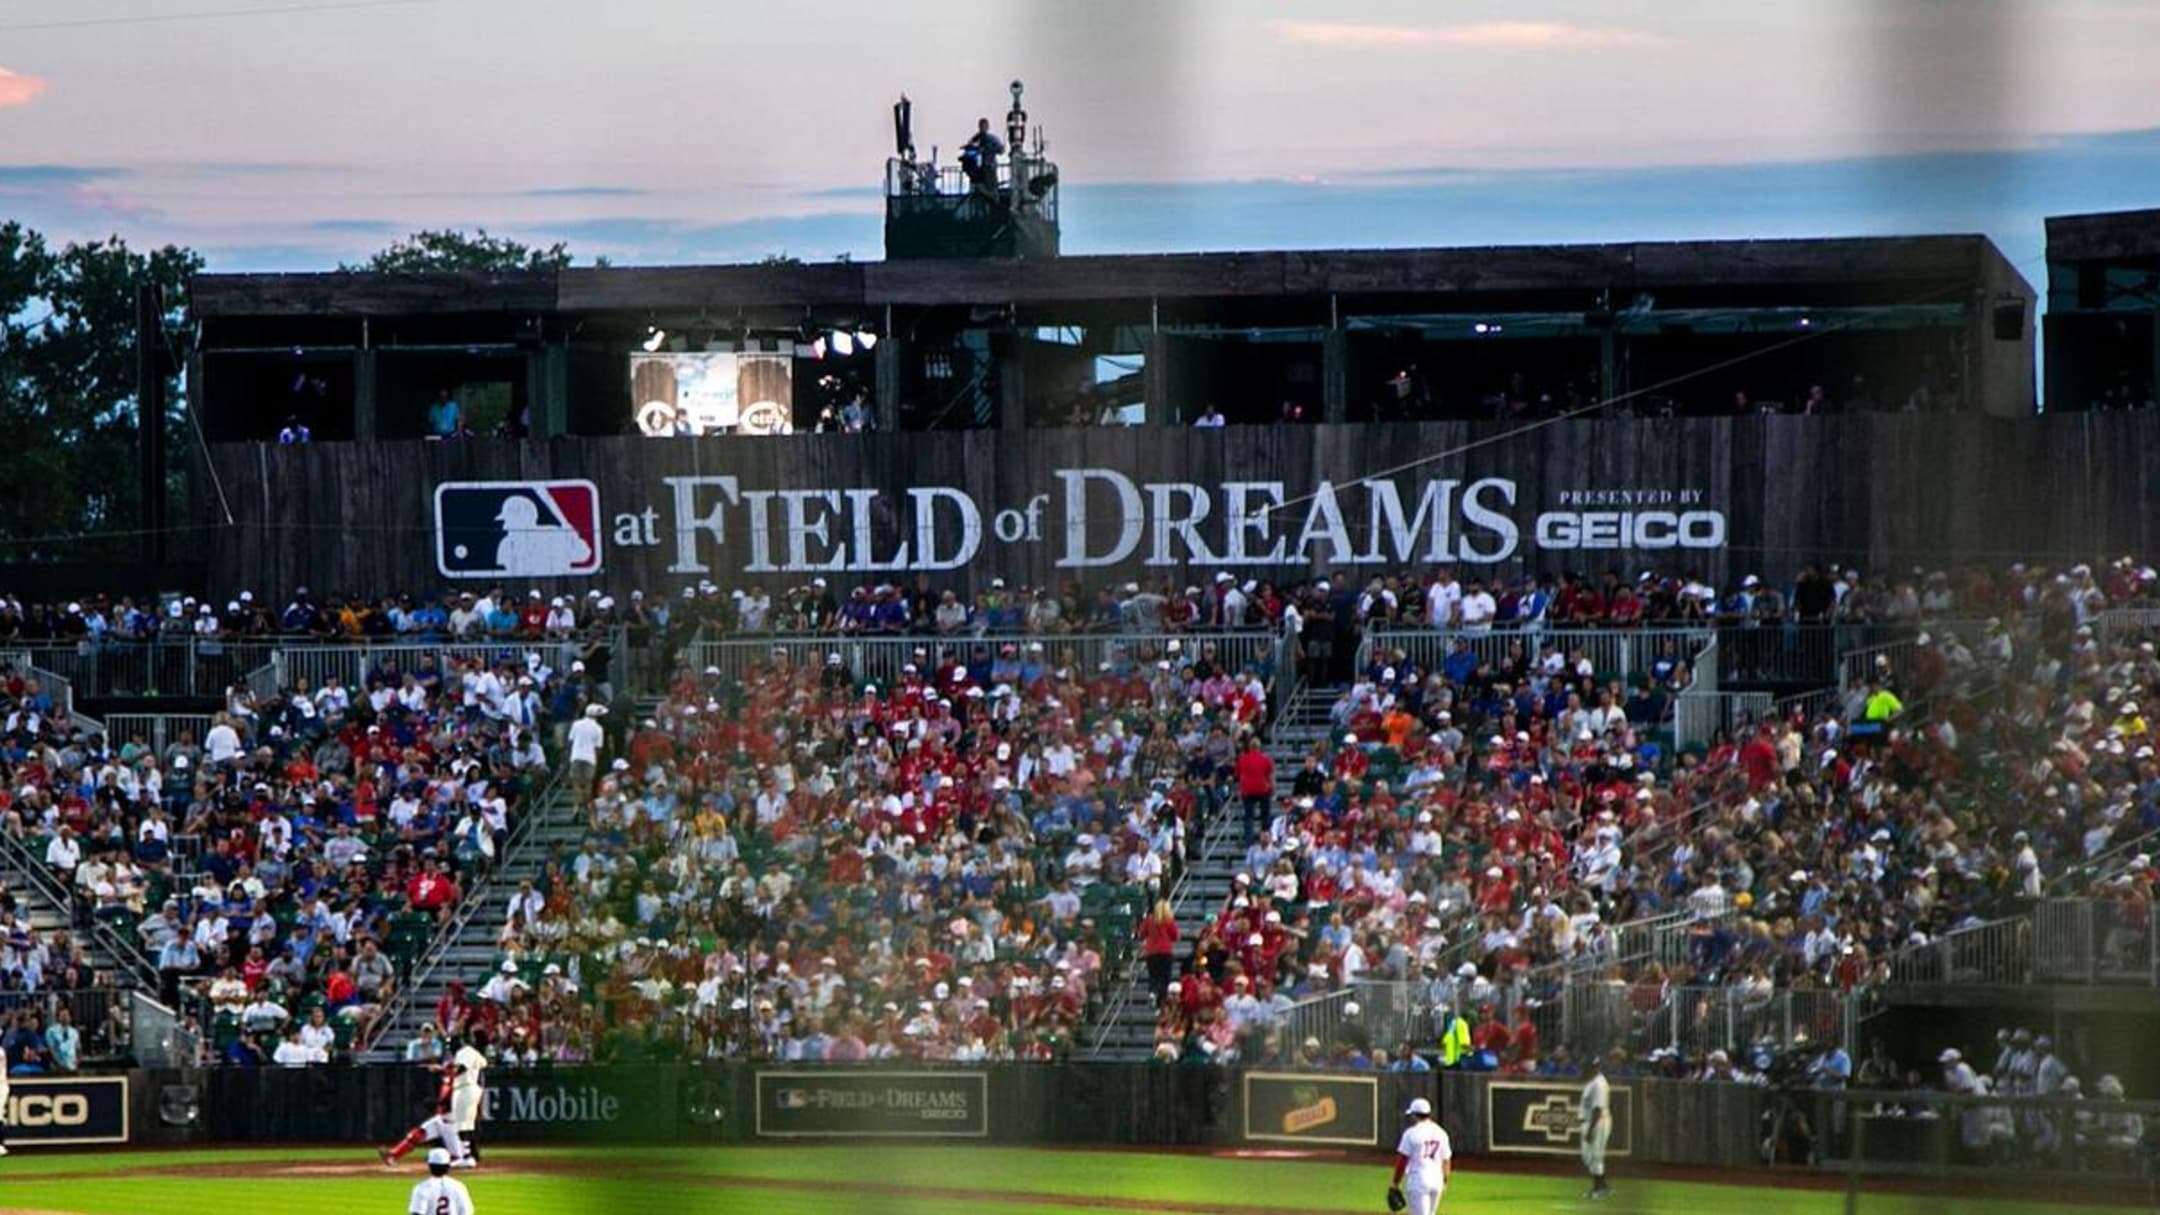 Hologram Harry Caray's 7th inning stretch at Field of Dreams game